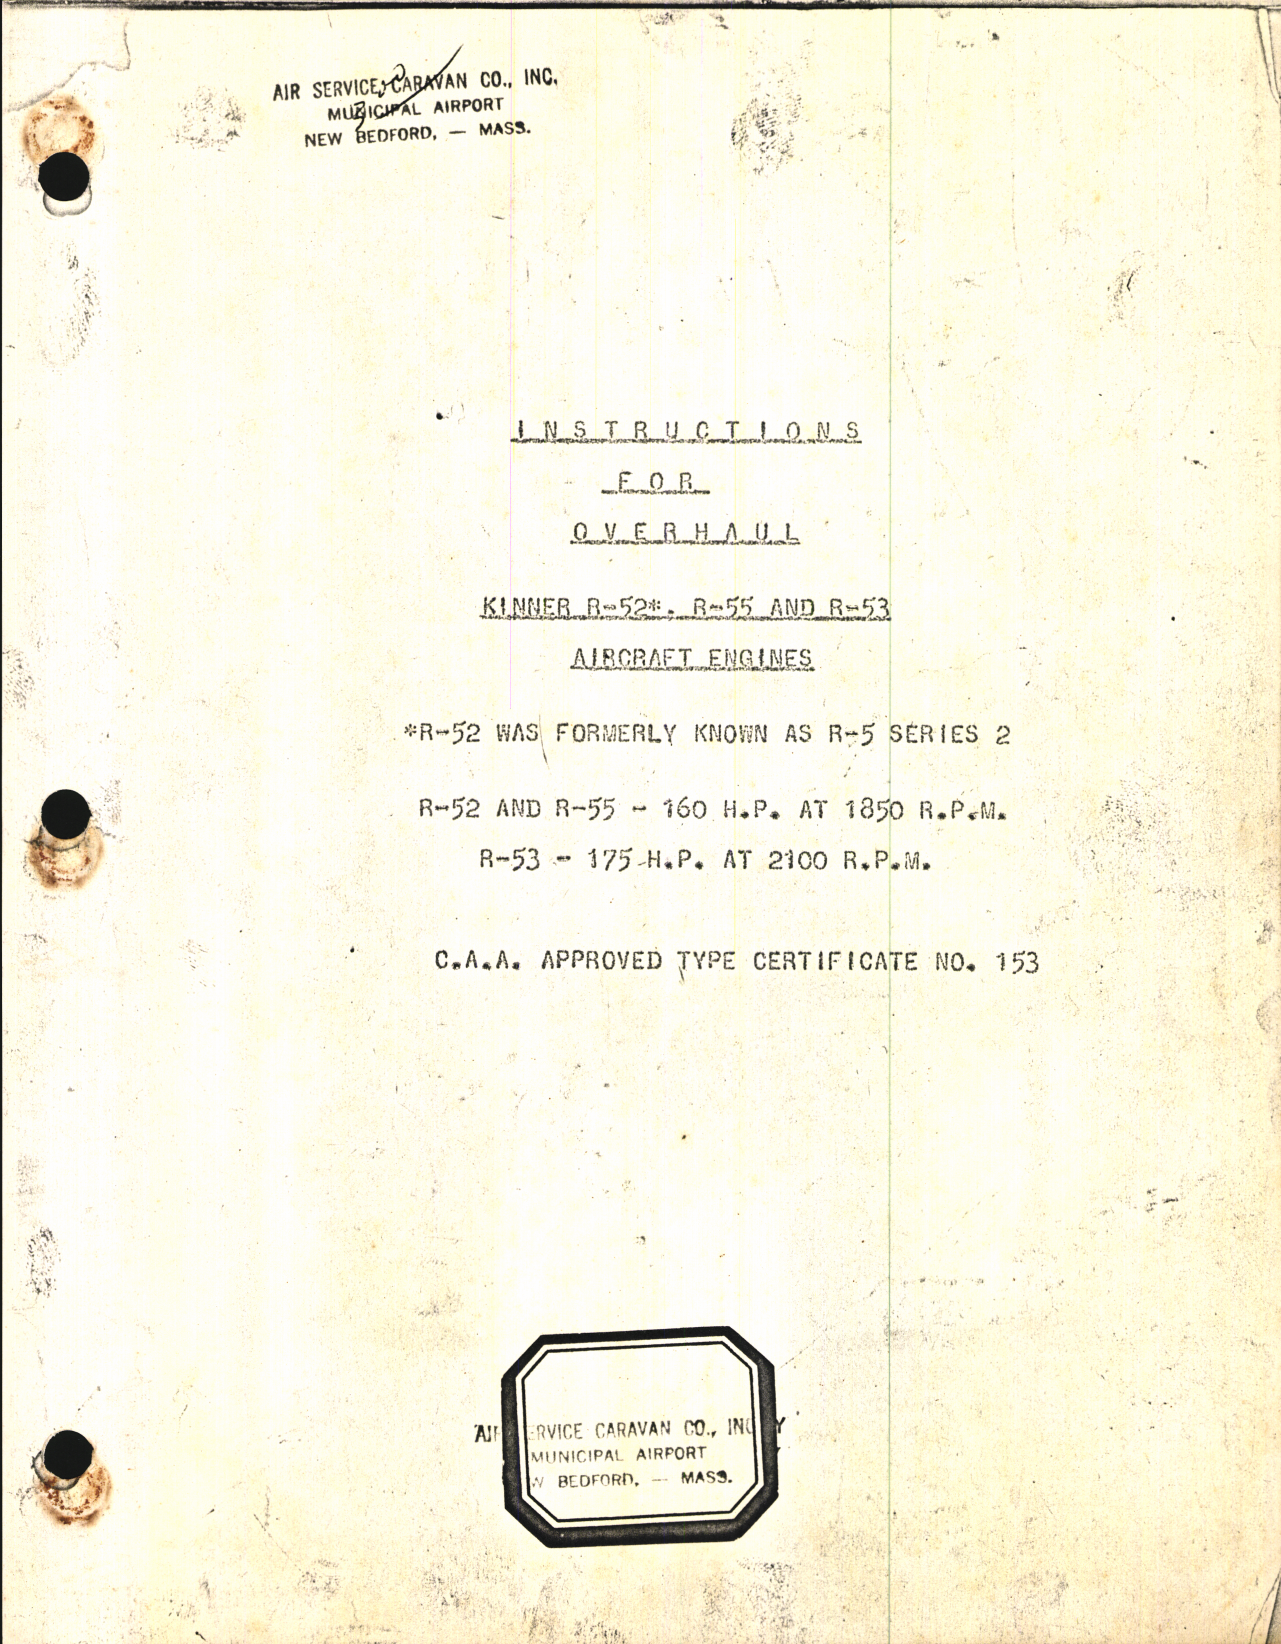 Sample page 1 from AirCorps Library document: Instructions for Overhaul for Kinner R-52, R-55, and R-53 Aircraft Engines